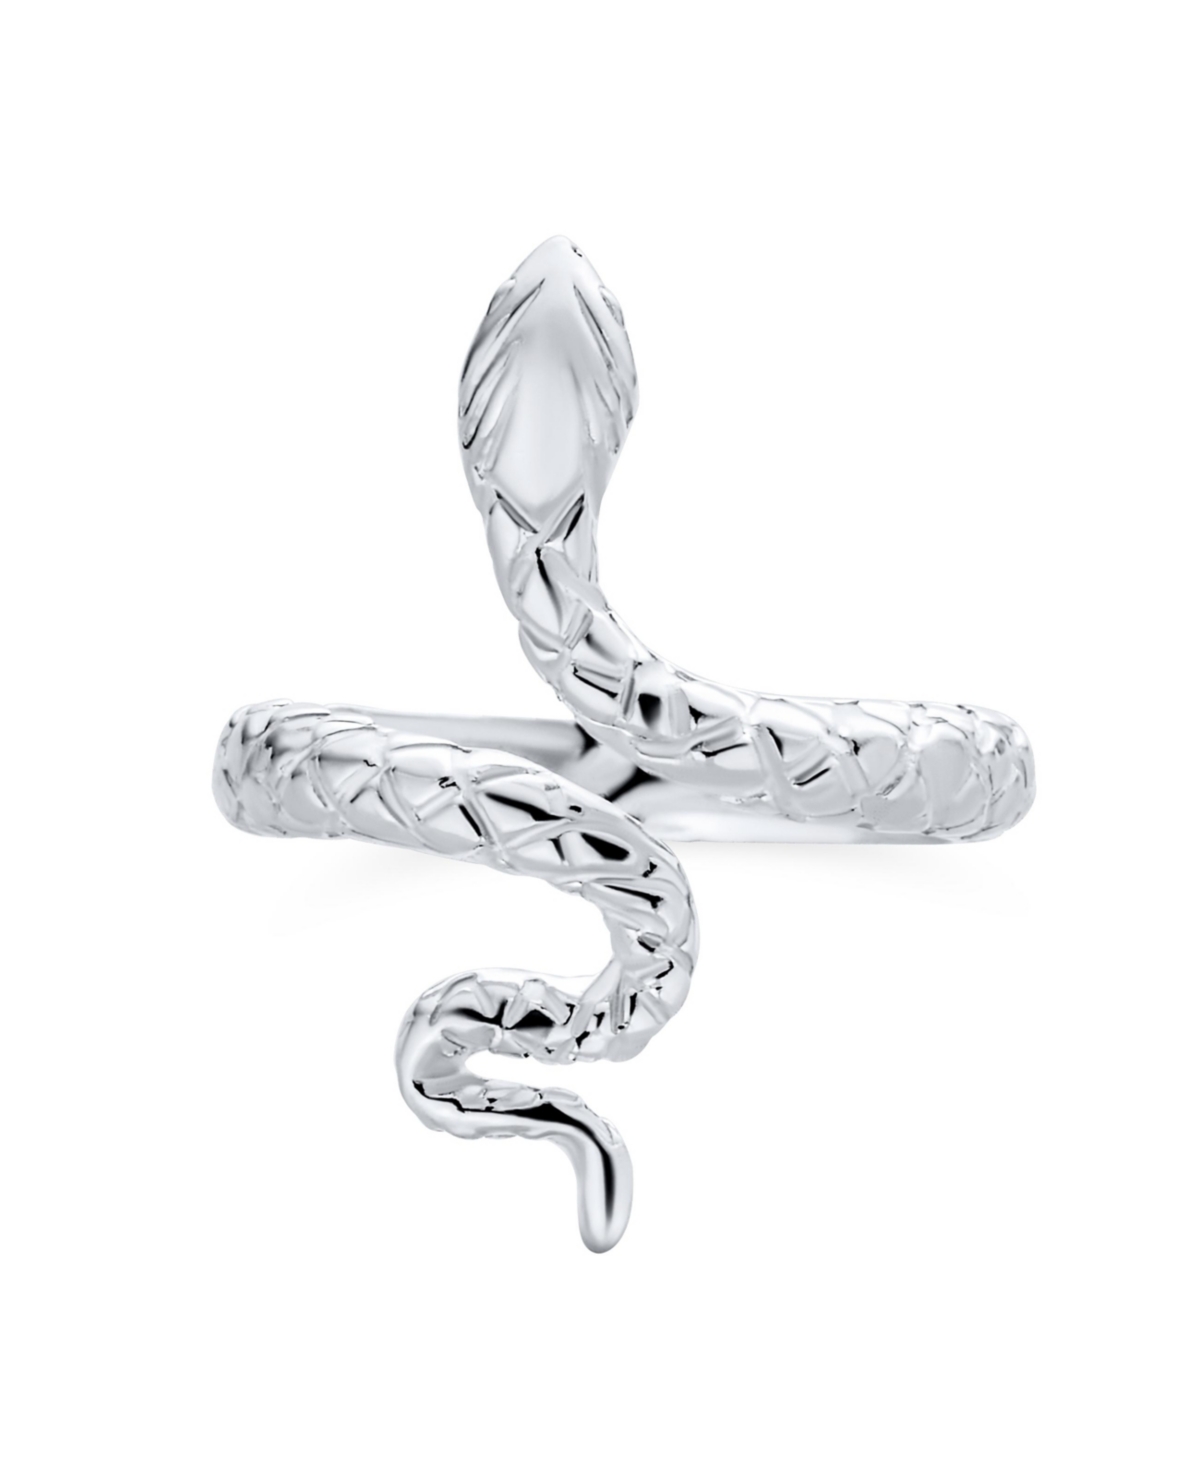 Garden Animal Pet Reptile Stack Wrap Bypass Coil Serpent Snake Ring Band For Women Teen .925 Sterling Silver - Silver b